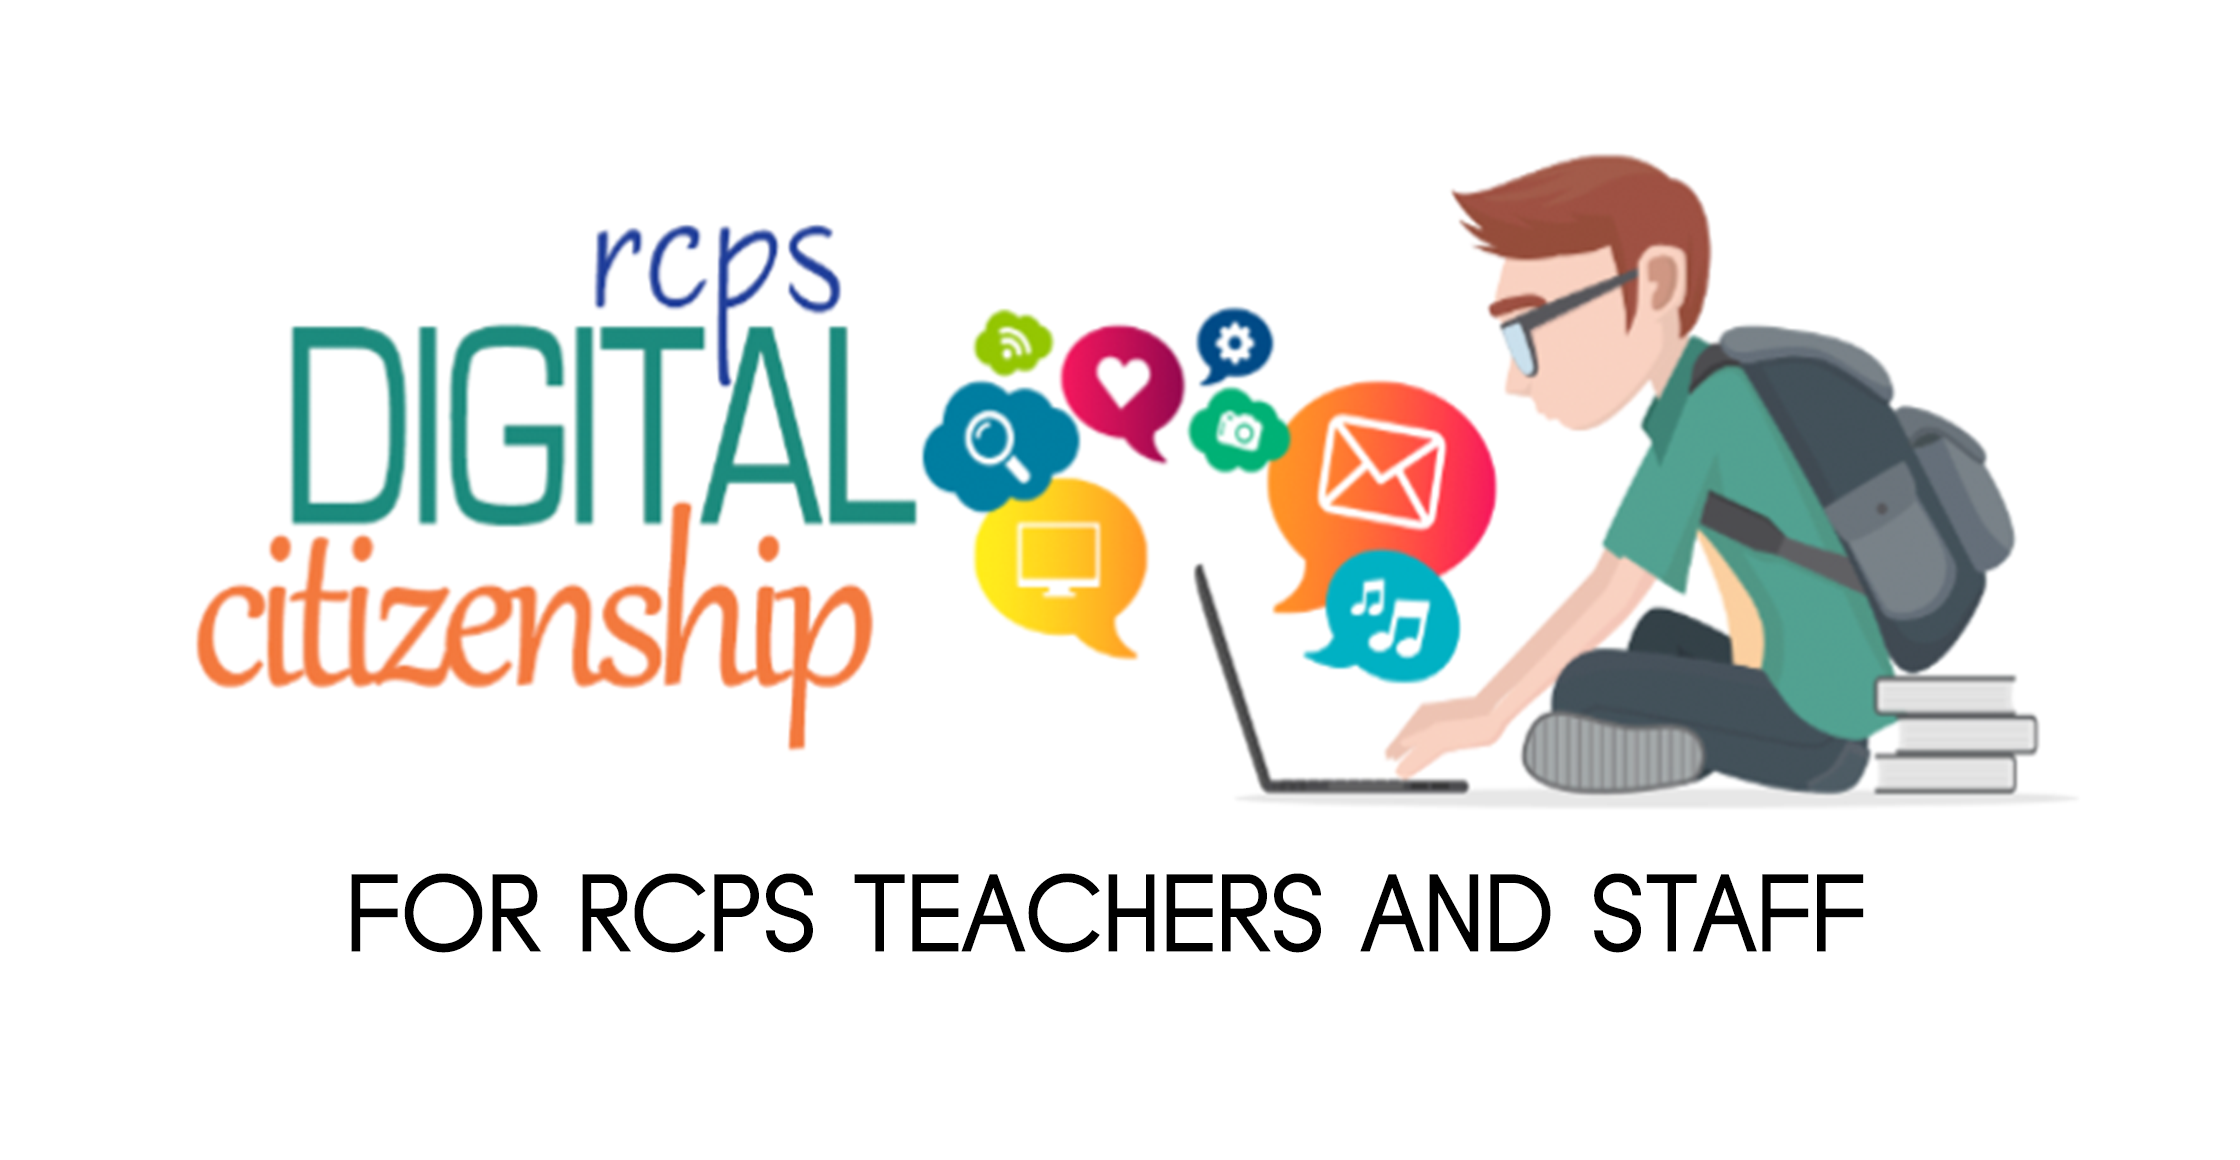 rcps digital citizenship for rcps teachers and staff